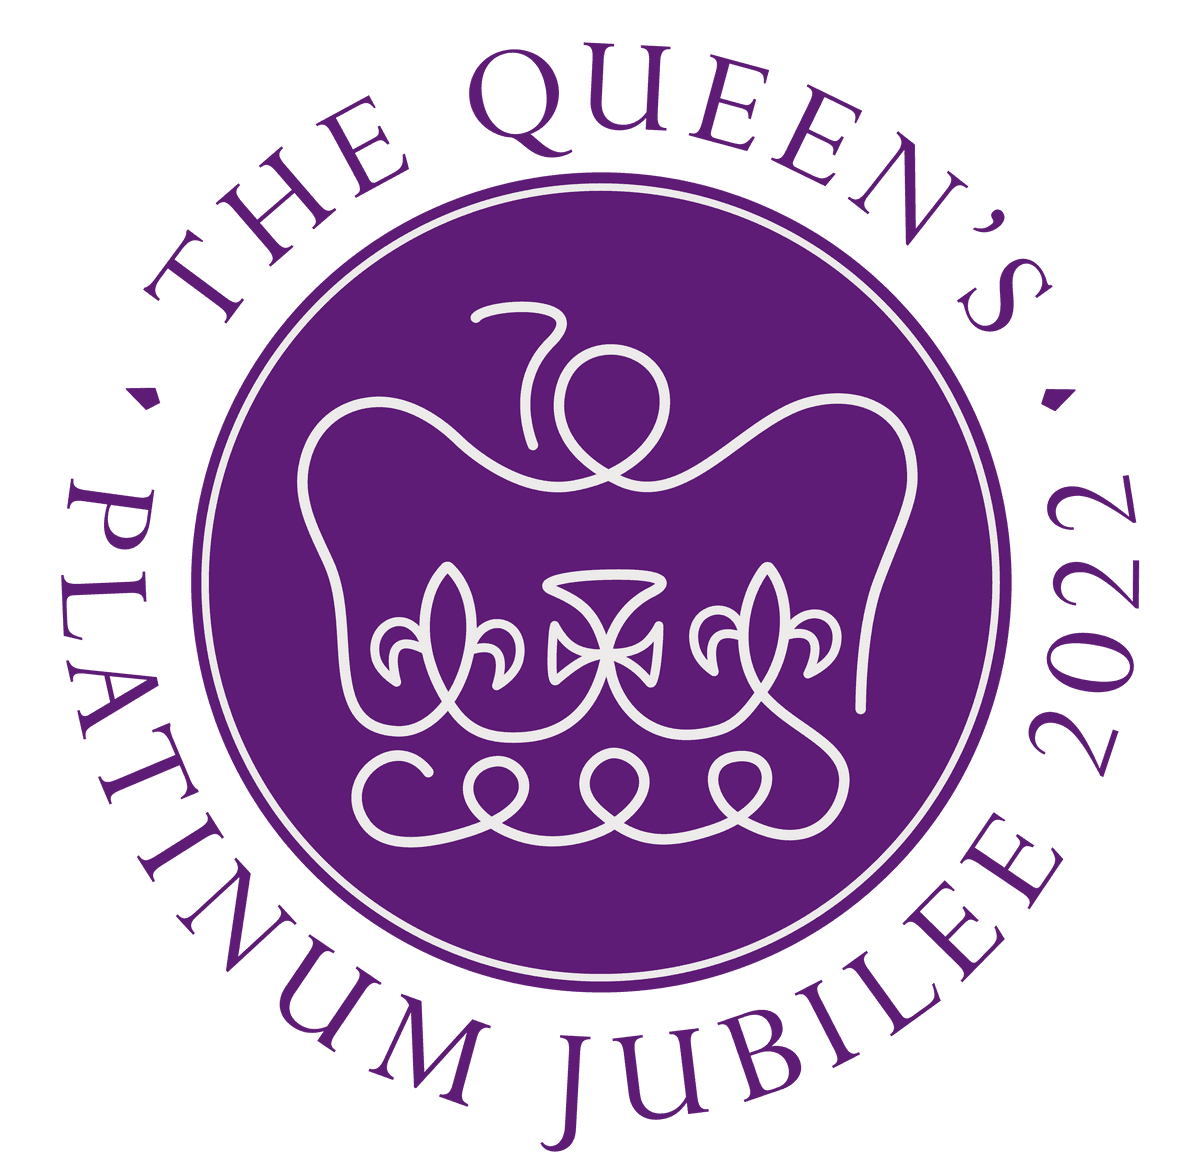 Crown emblem with text that says The Queen's Platinum Jubilee 2022